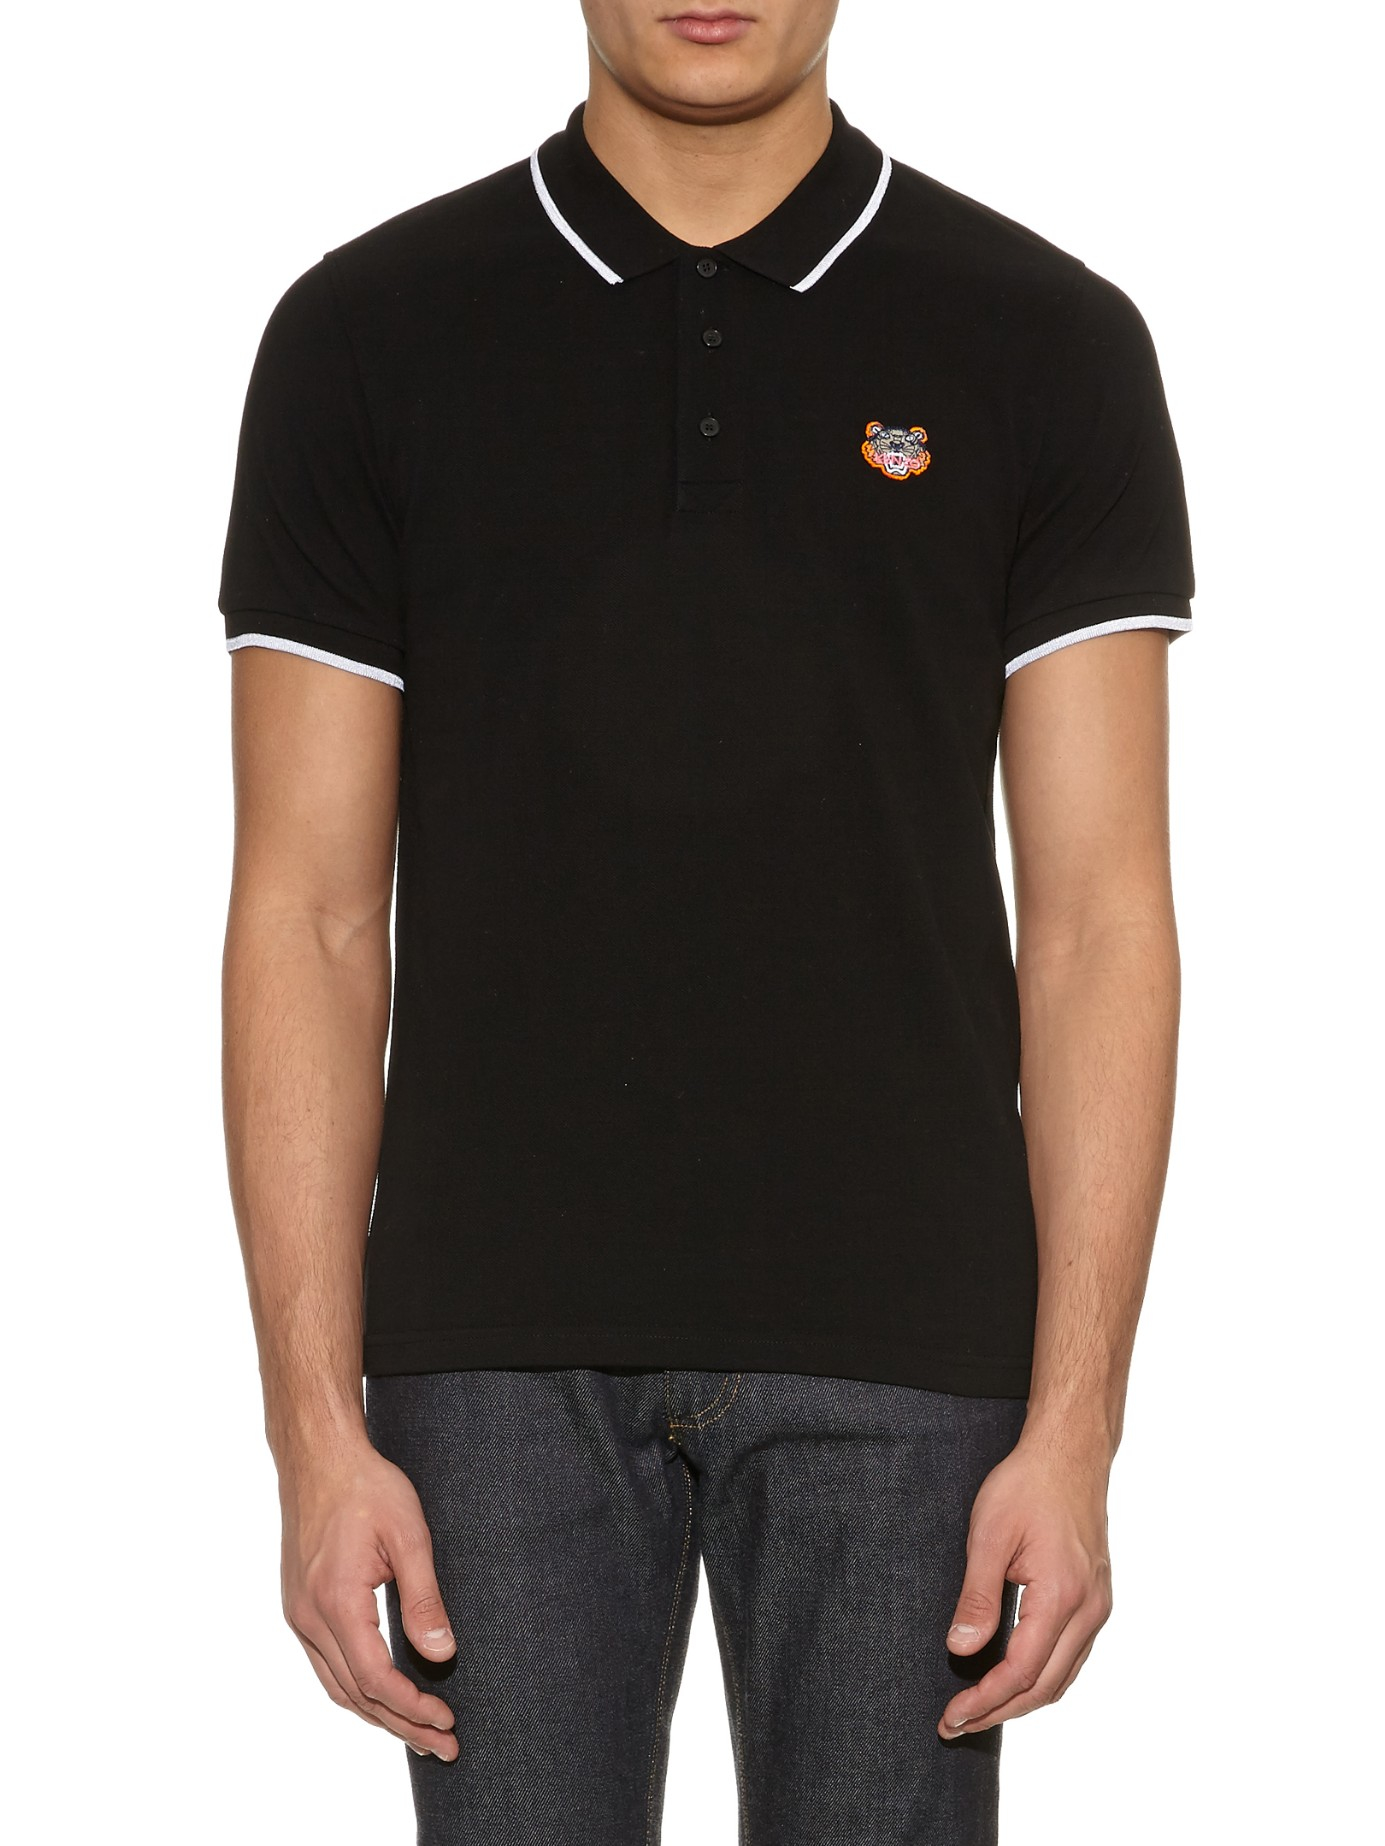 KENZO Tiger-Patch Cotton-Piqué Polo Shirt in Black for Men - Lyst